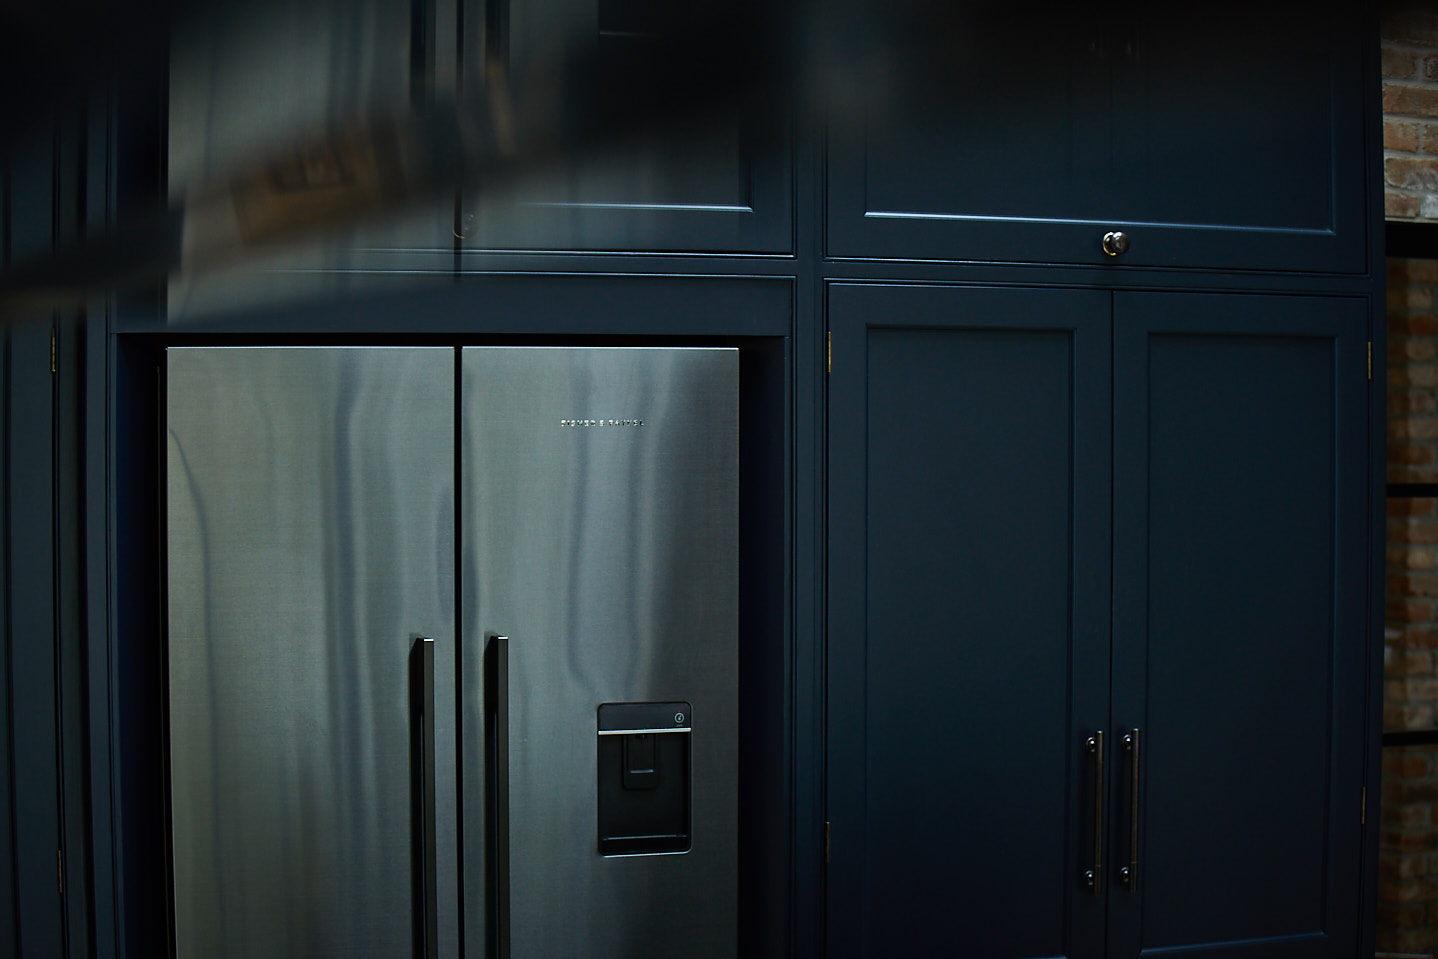 Gun metal Fisher & Paykel stainless steel fridge freezer integrated in to tall painted cabinets